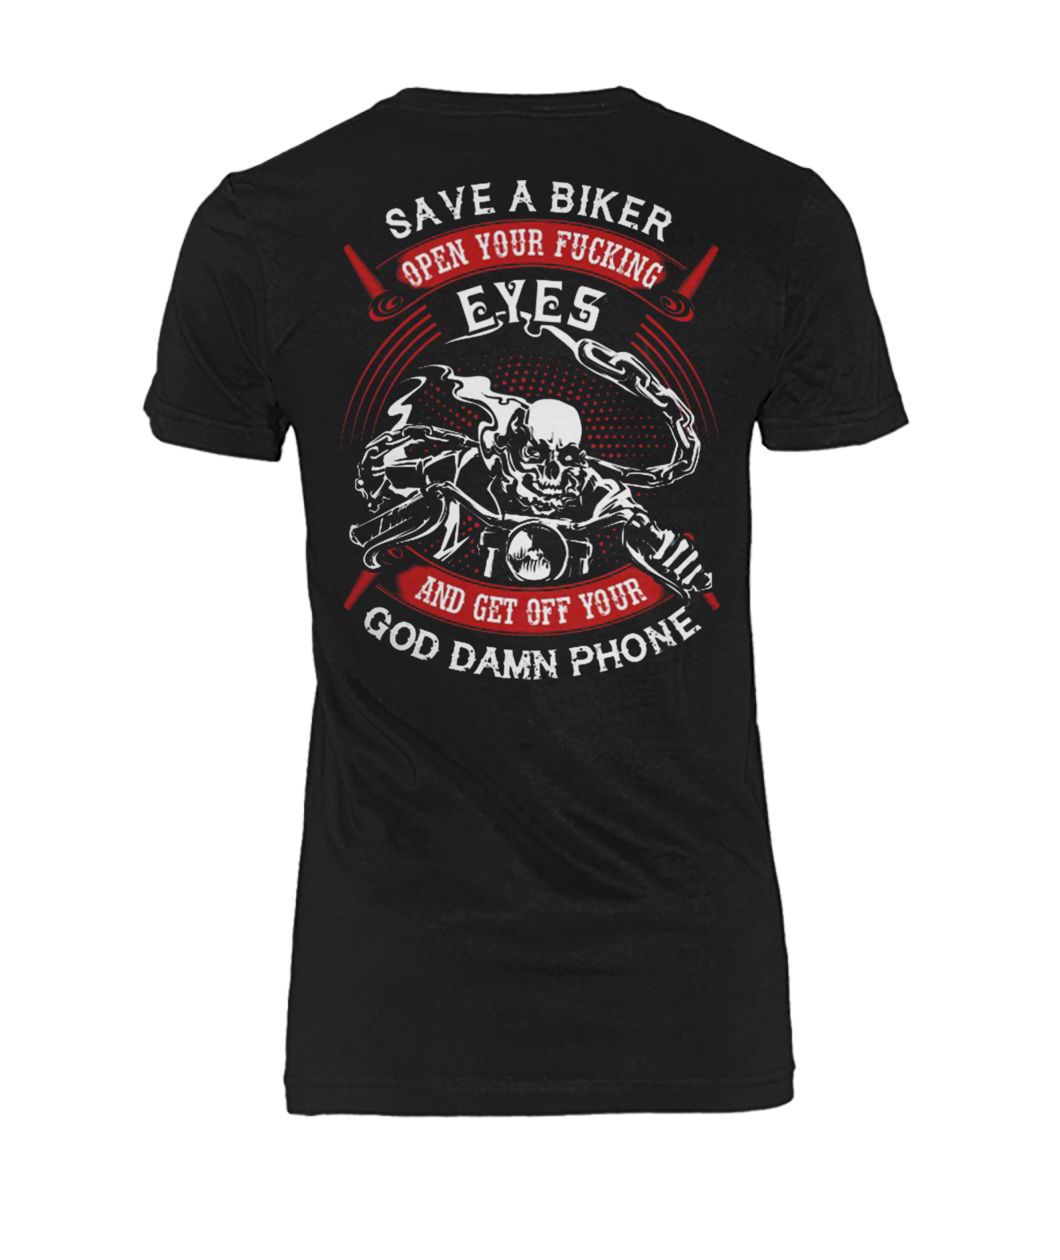 Save a biker open your fucking eyes and get off your god damn phone women's crew tee